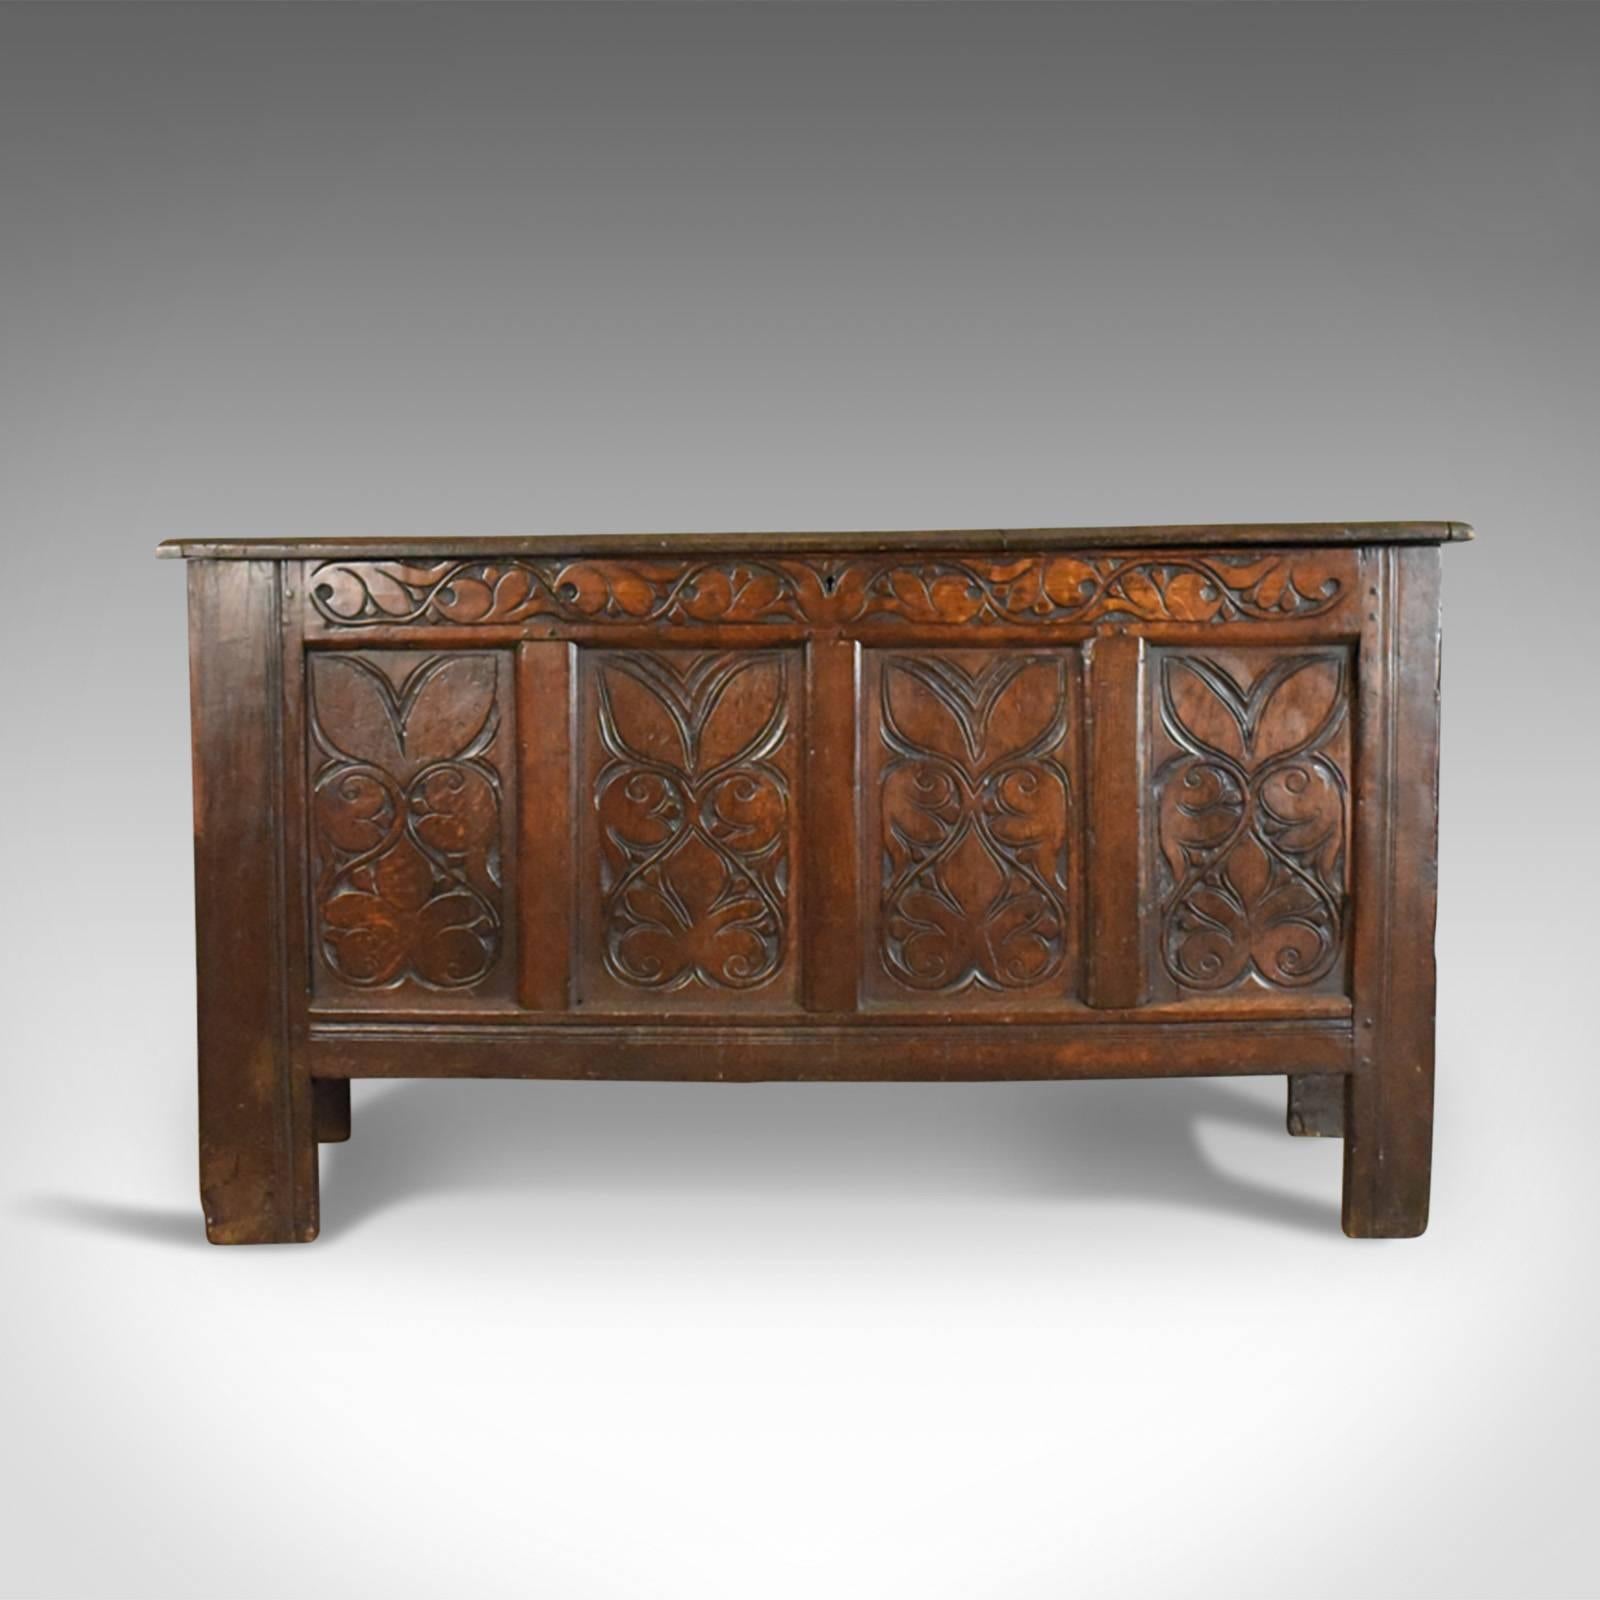 This is an antique coffer, a large English oak chest or early 18th century trunk dating to circa 1700.

Substantial oak chest displaying rich, dark color
Pegged joint construction with a desirable aged patina
Four panel chest with grain interest